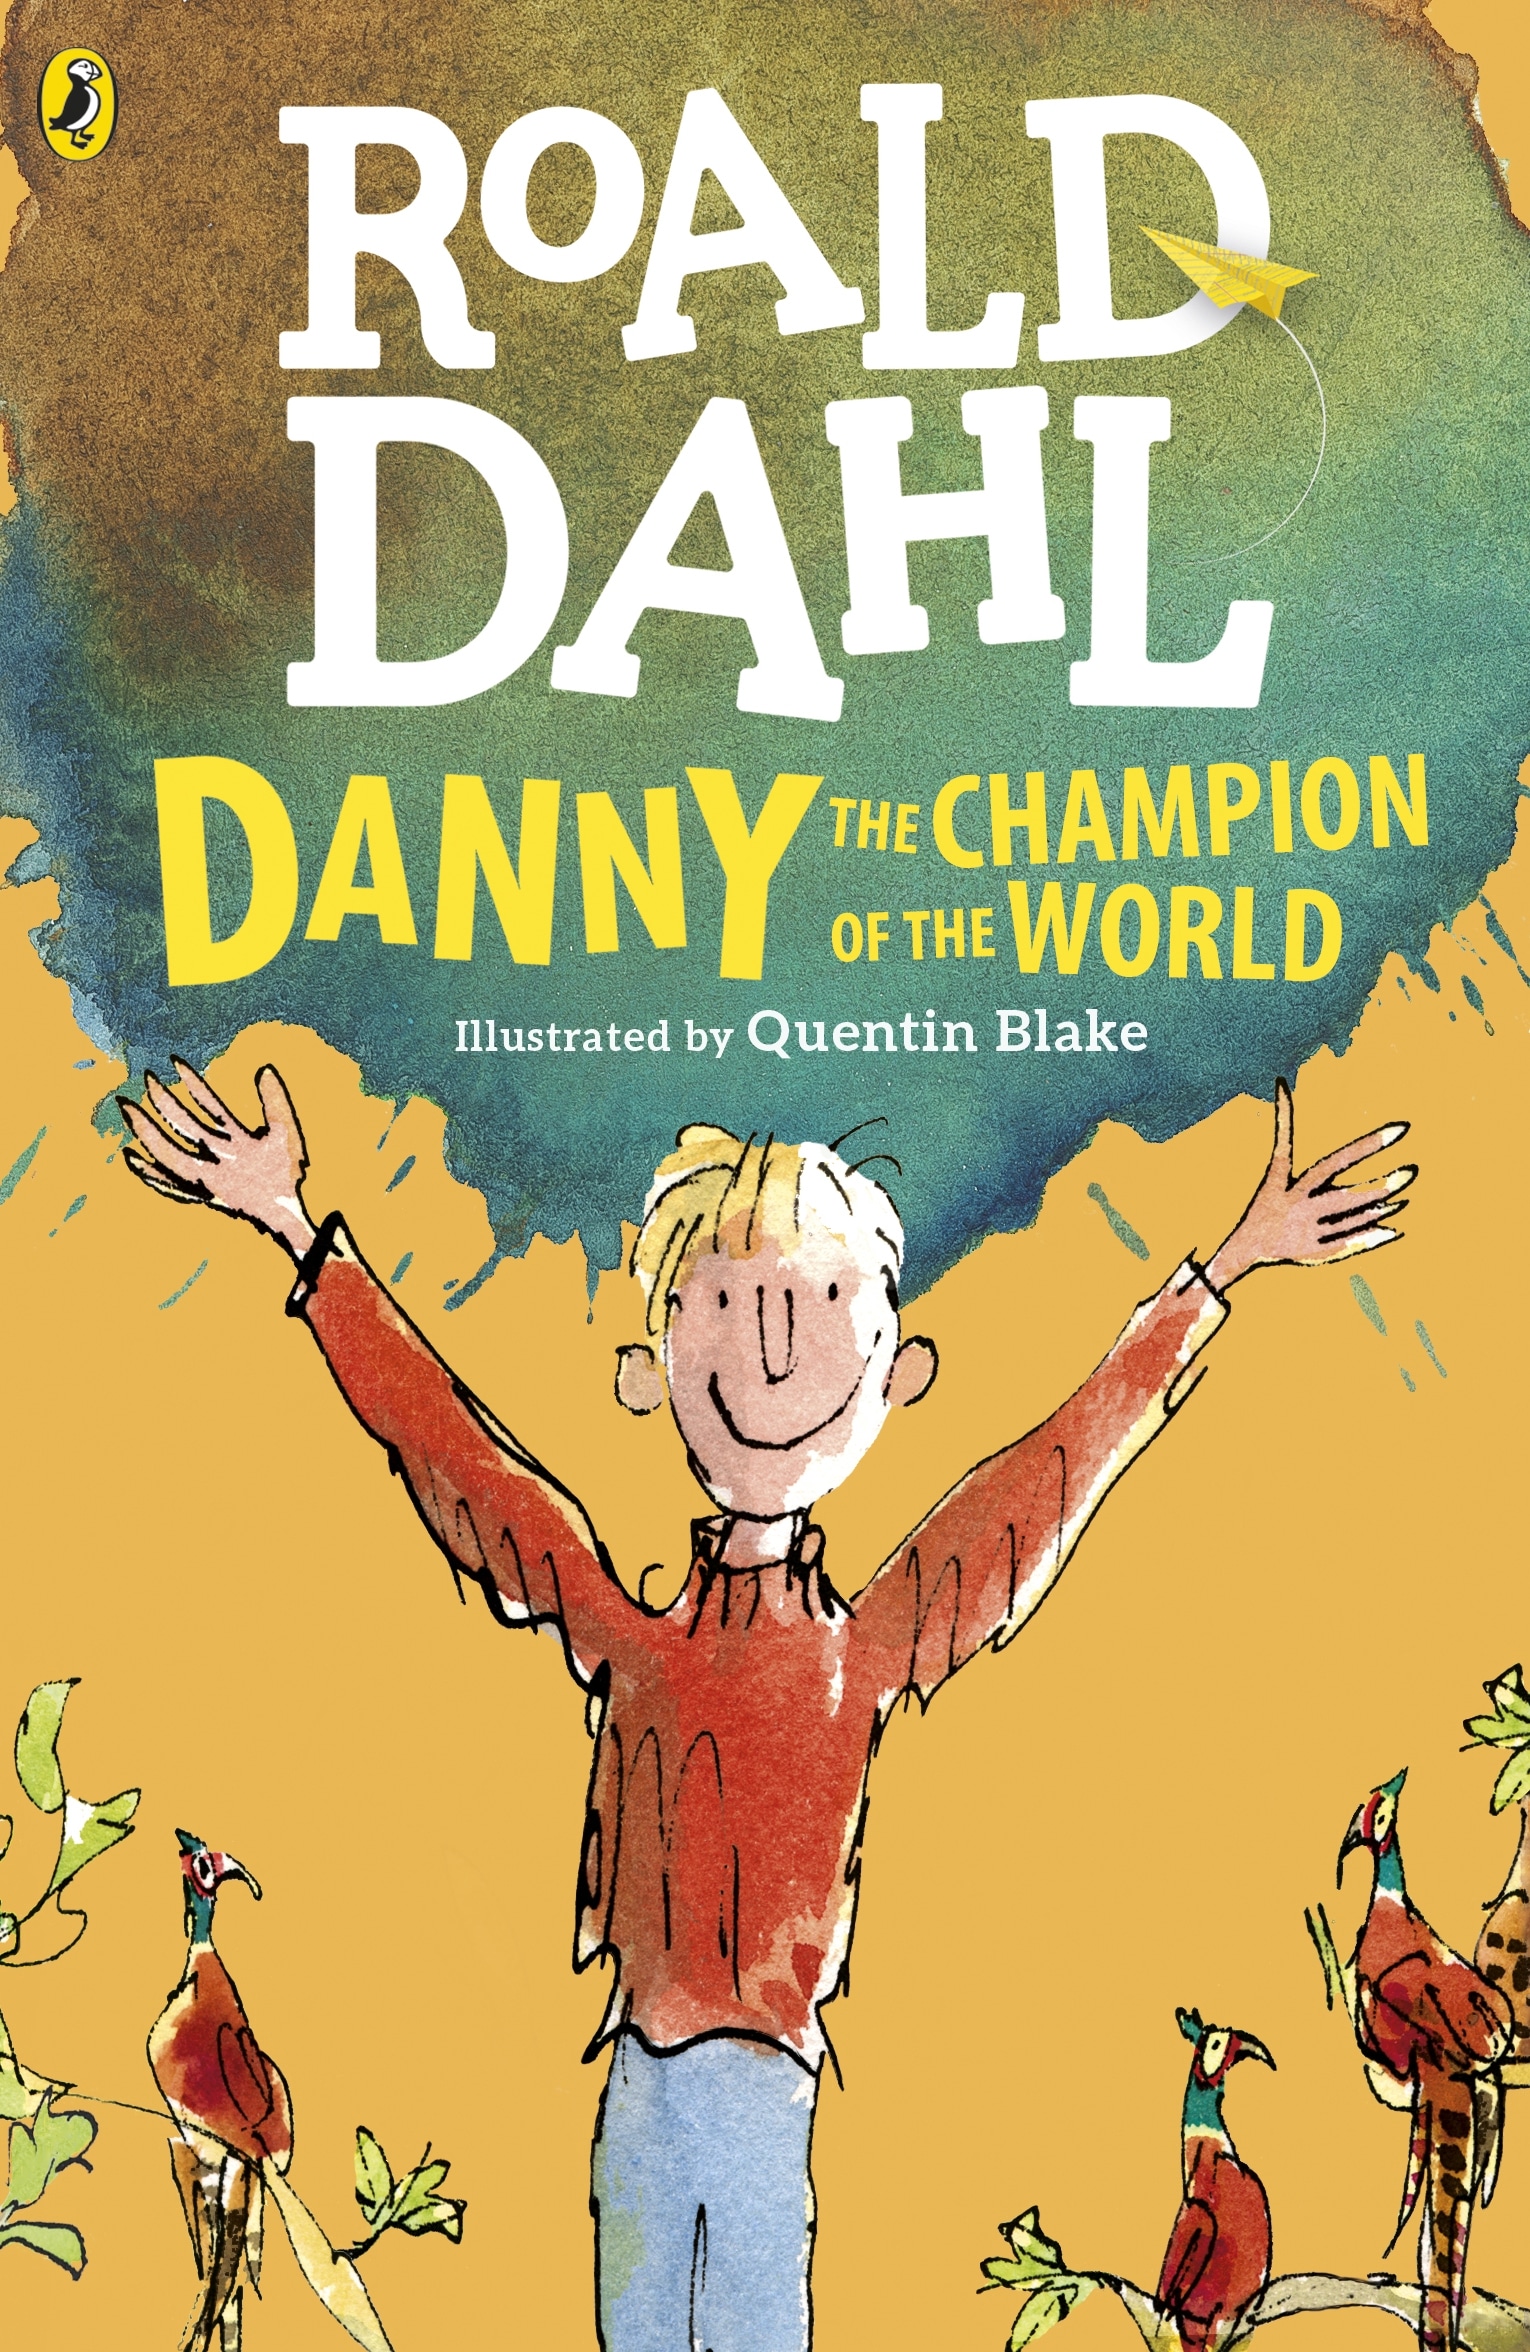 Book “Danny the Champion of the World” by Roald Dahl — February 11, 2016